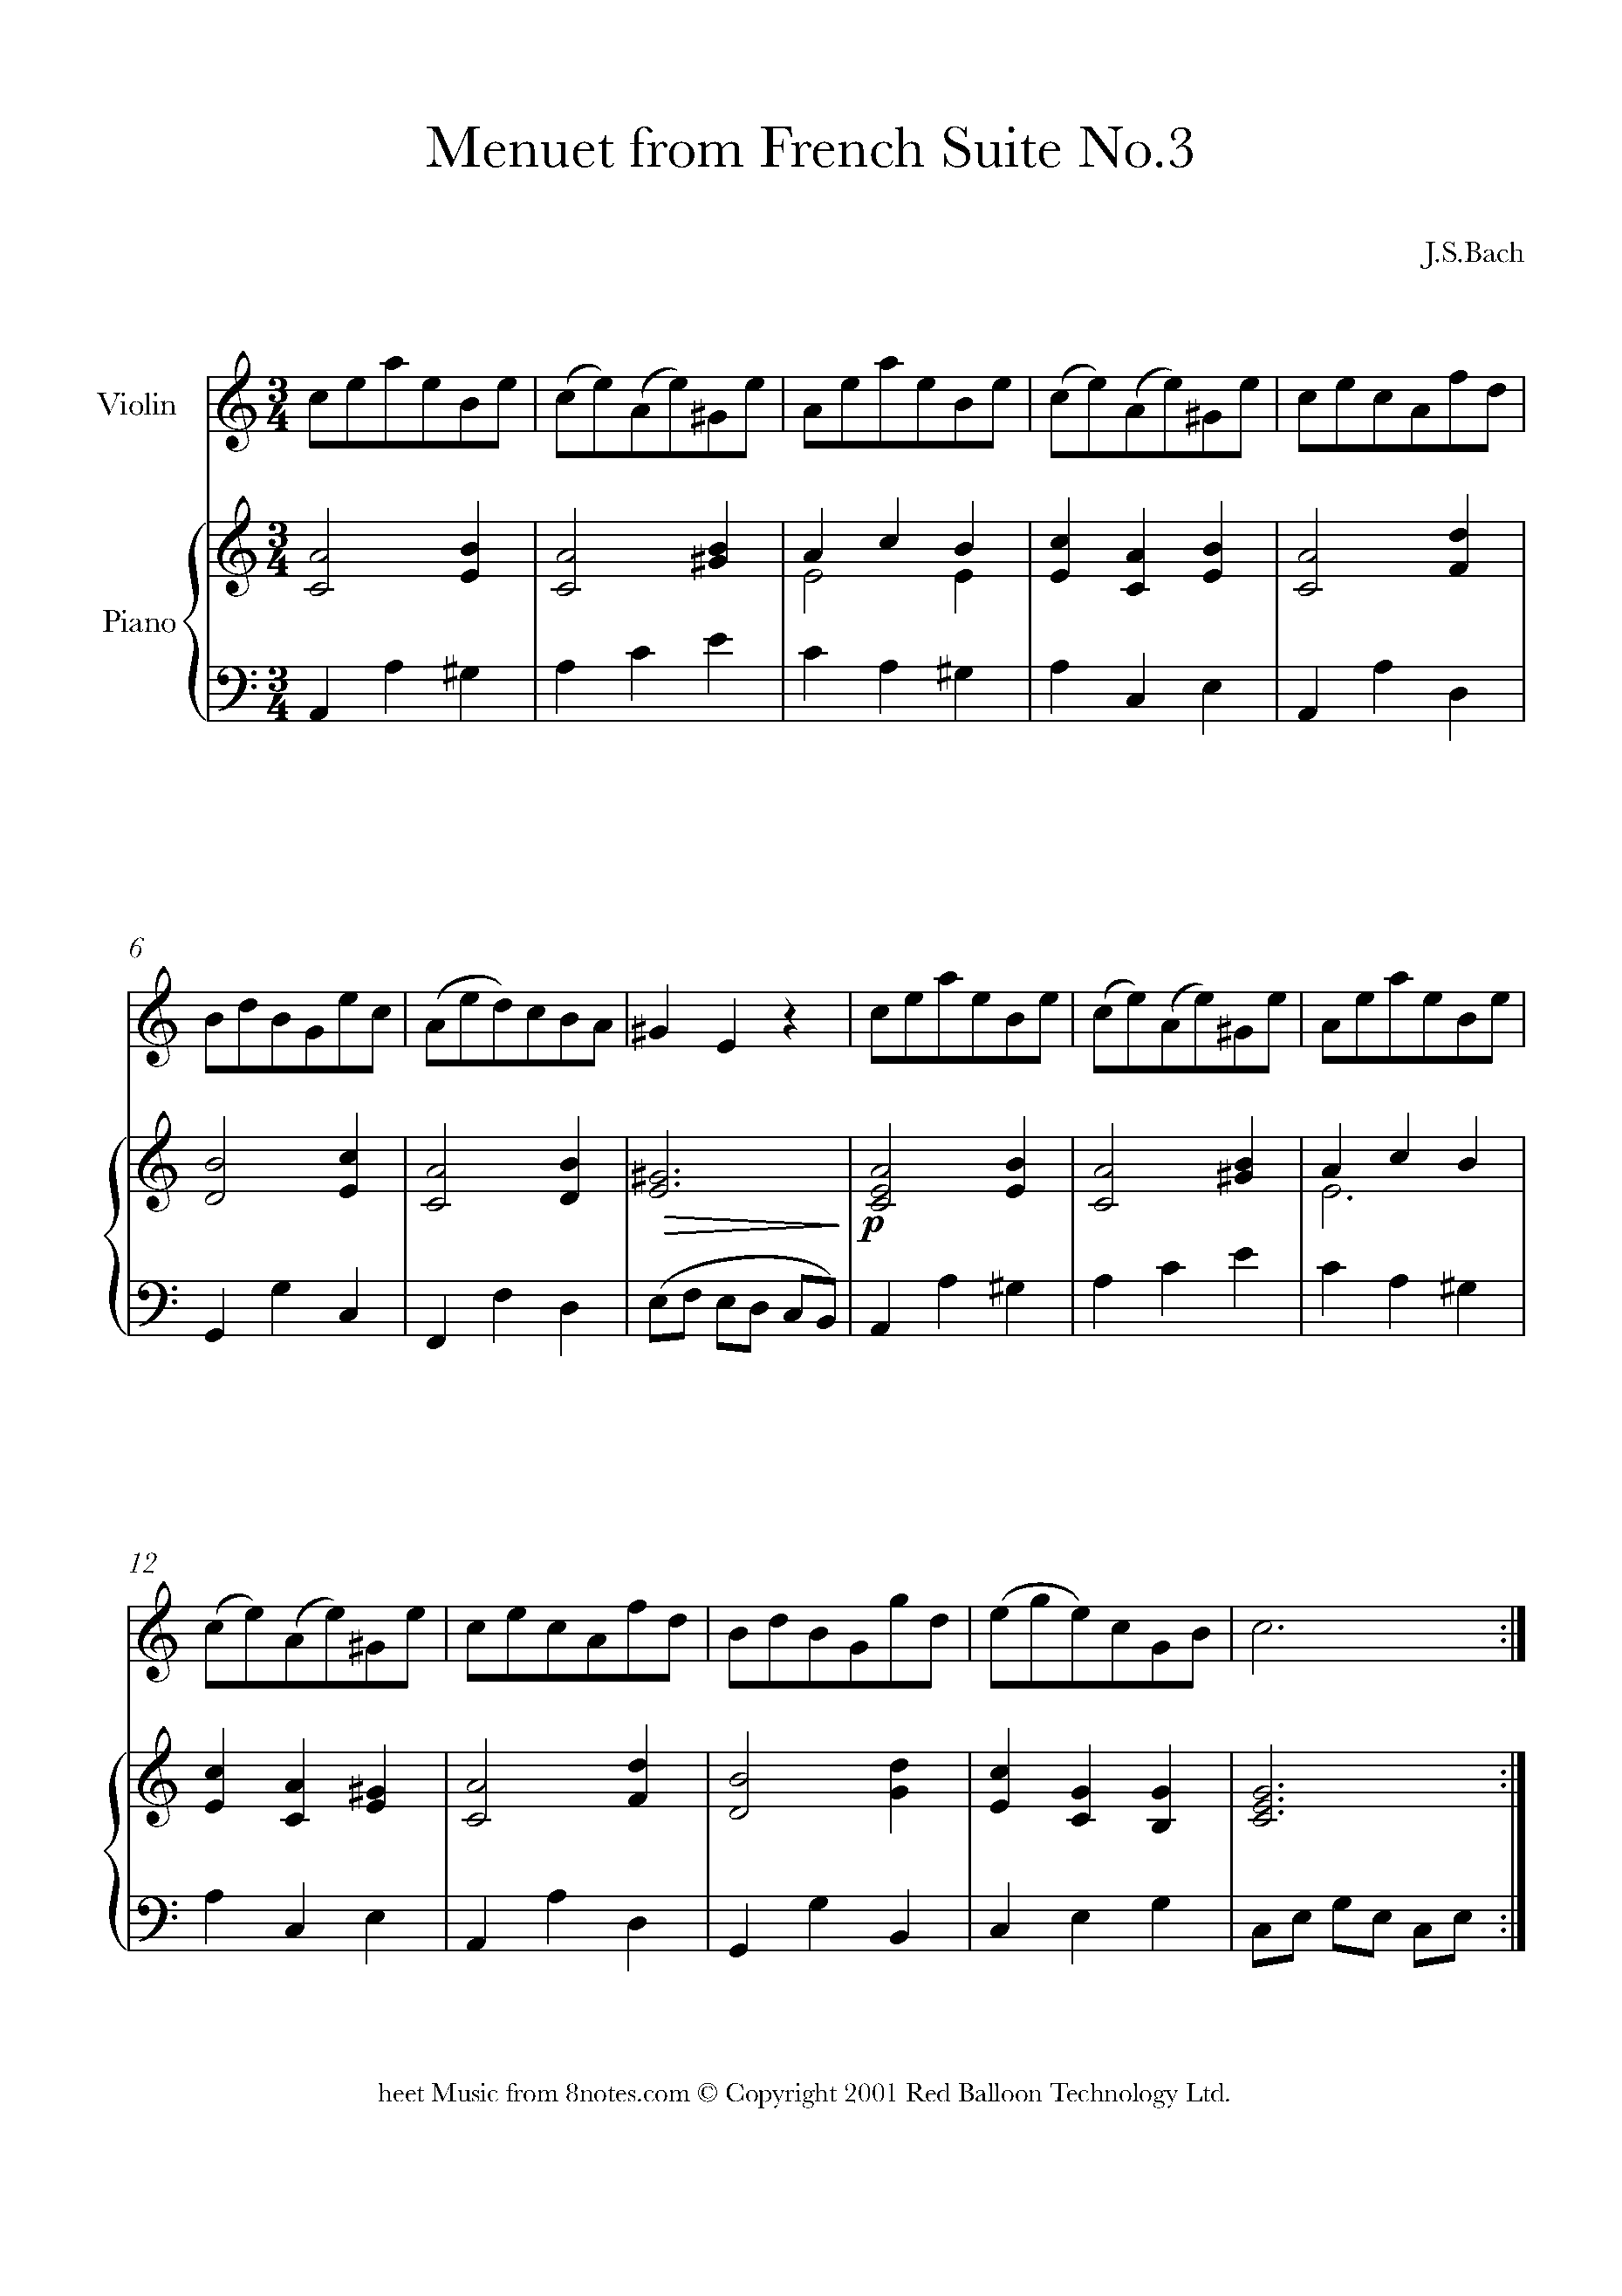 Kent Archaic Mediate Bach - Meneut from French Suite No.3 Sheet music for Violin - 8notes.com